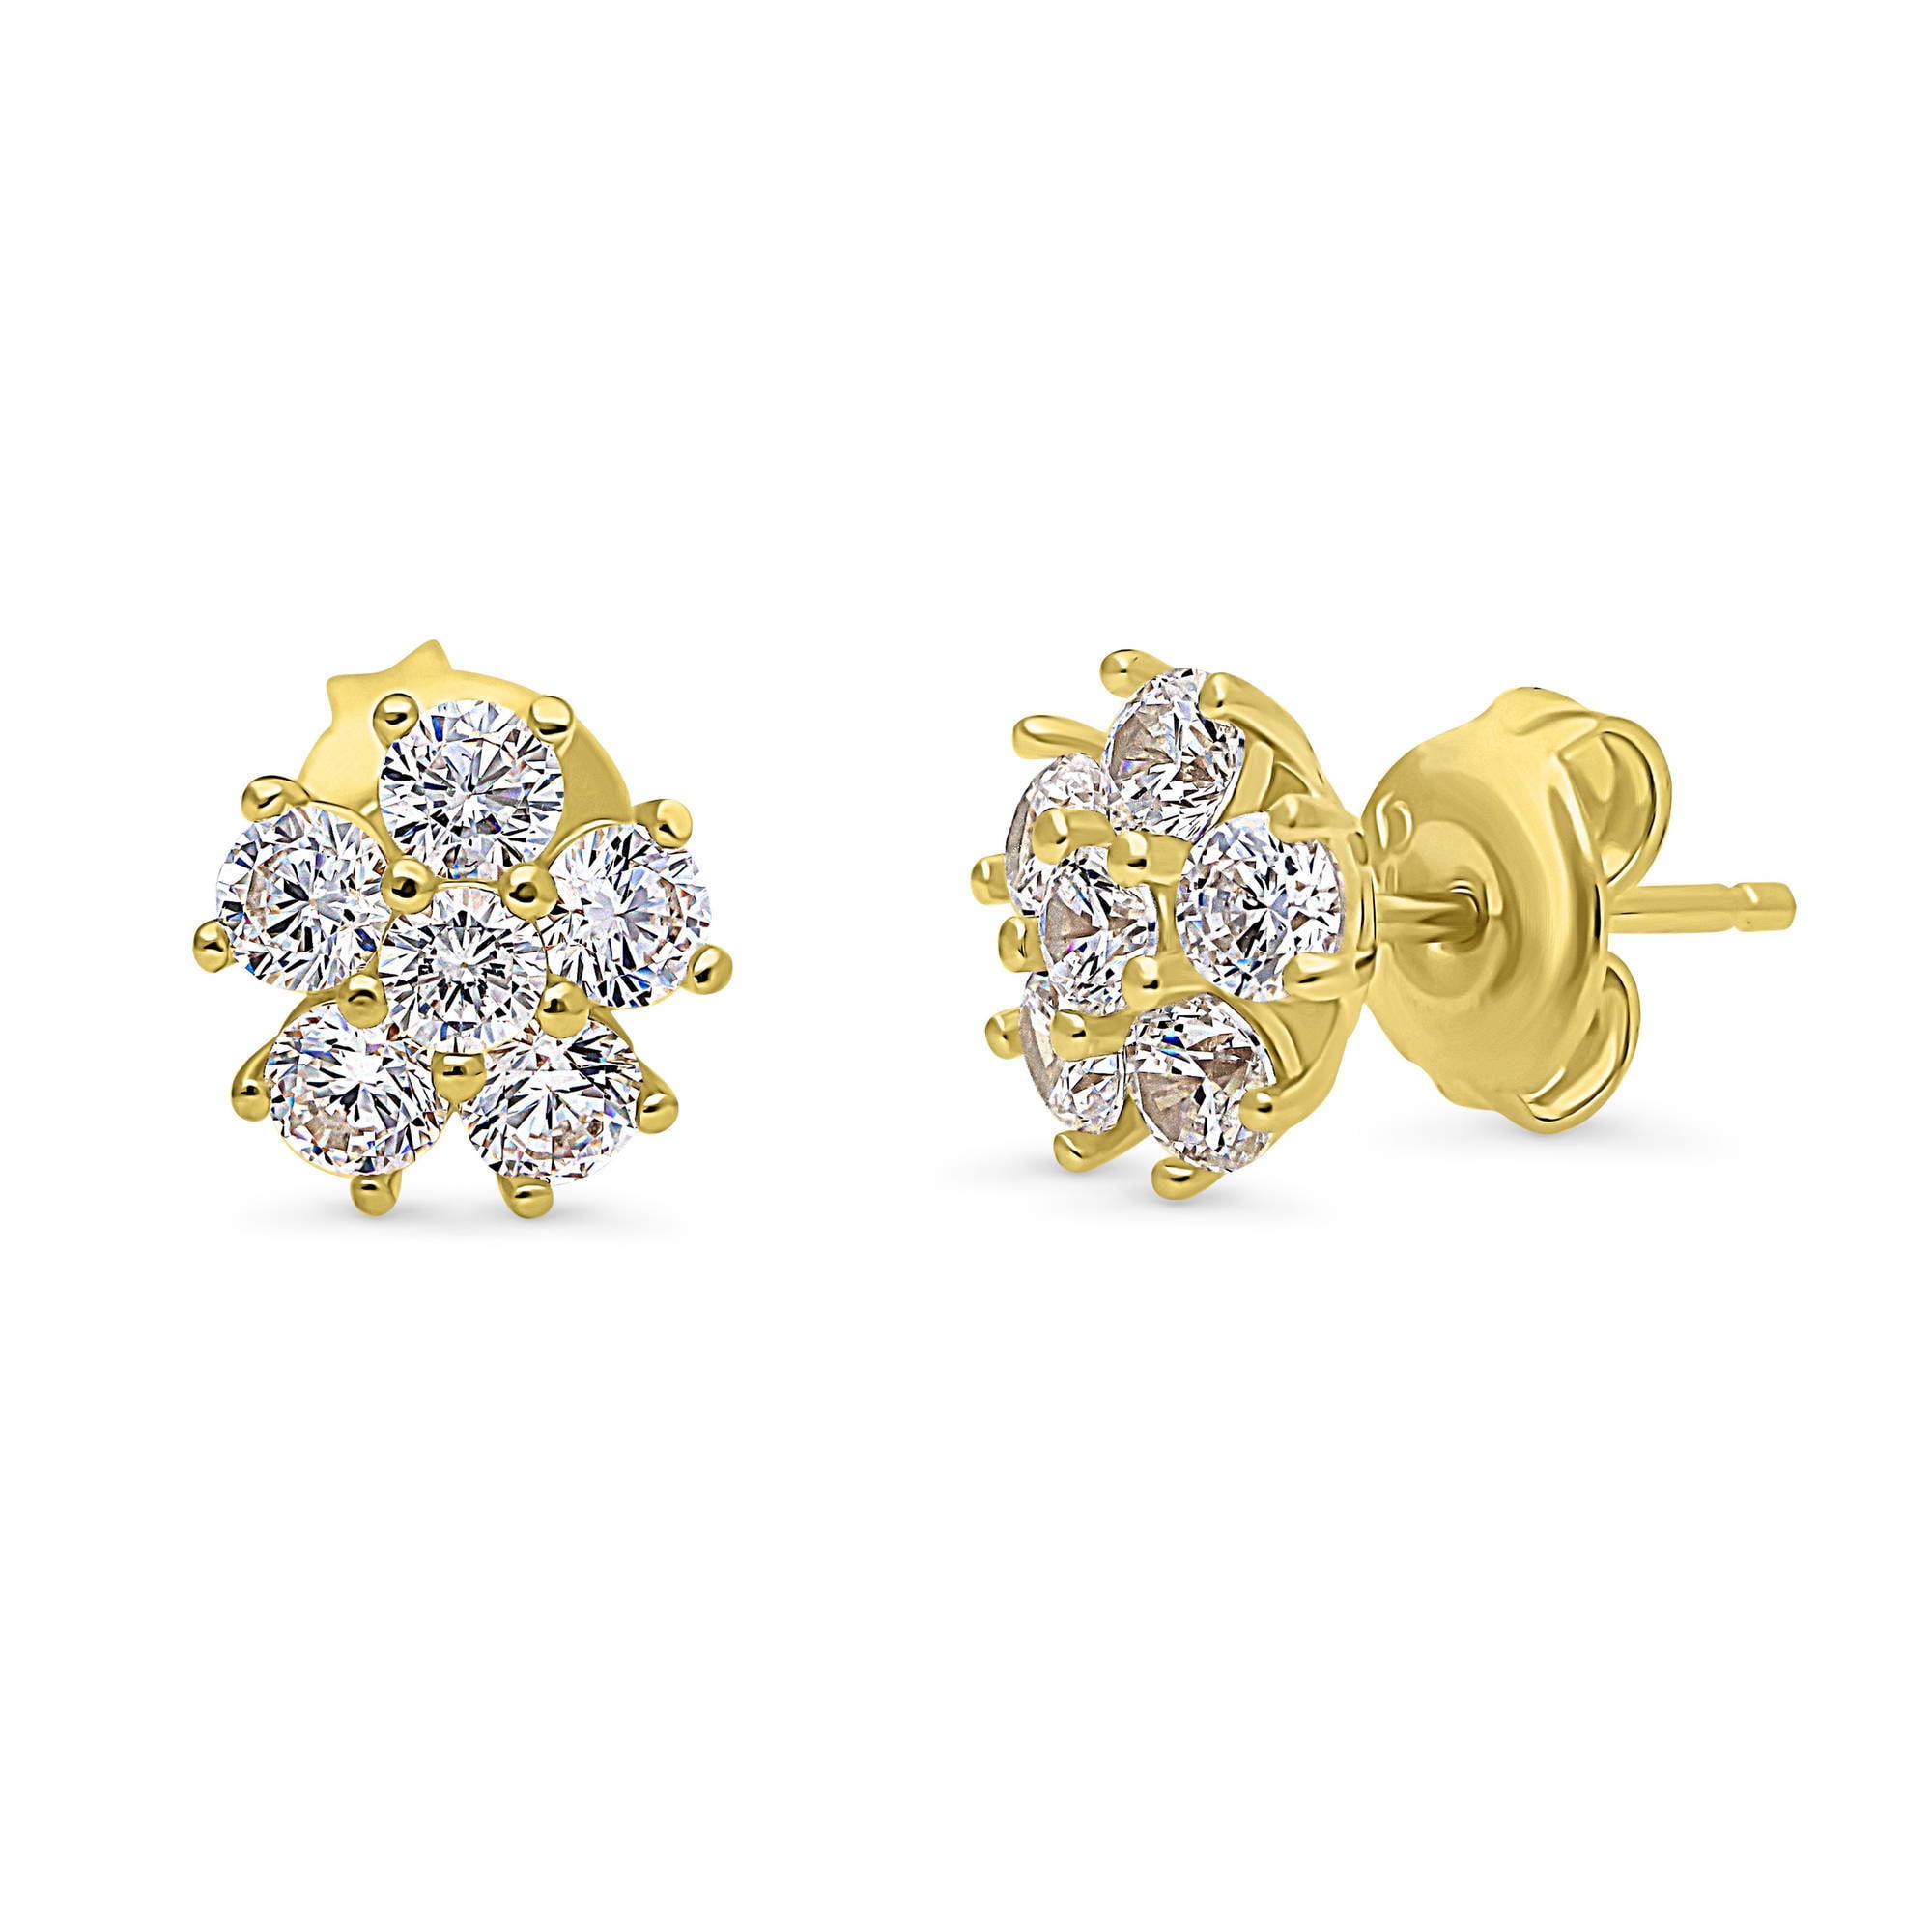 BERRICLE Gold Flashed Sterling Silver Cubic Zirconia CZ Fashion Stud Earrings 8mm